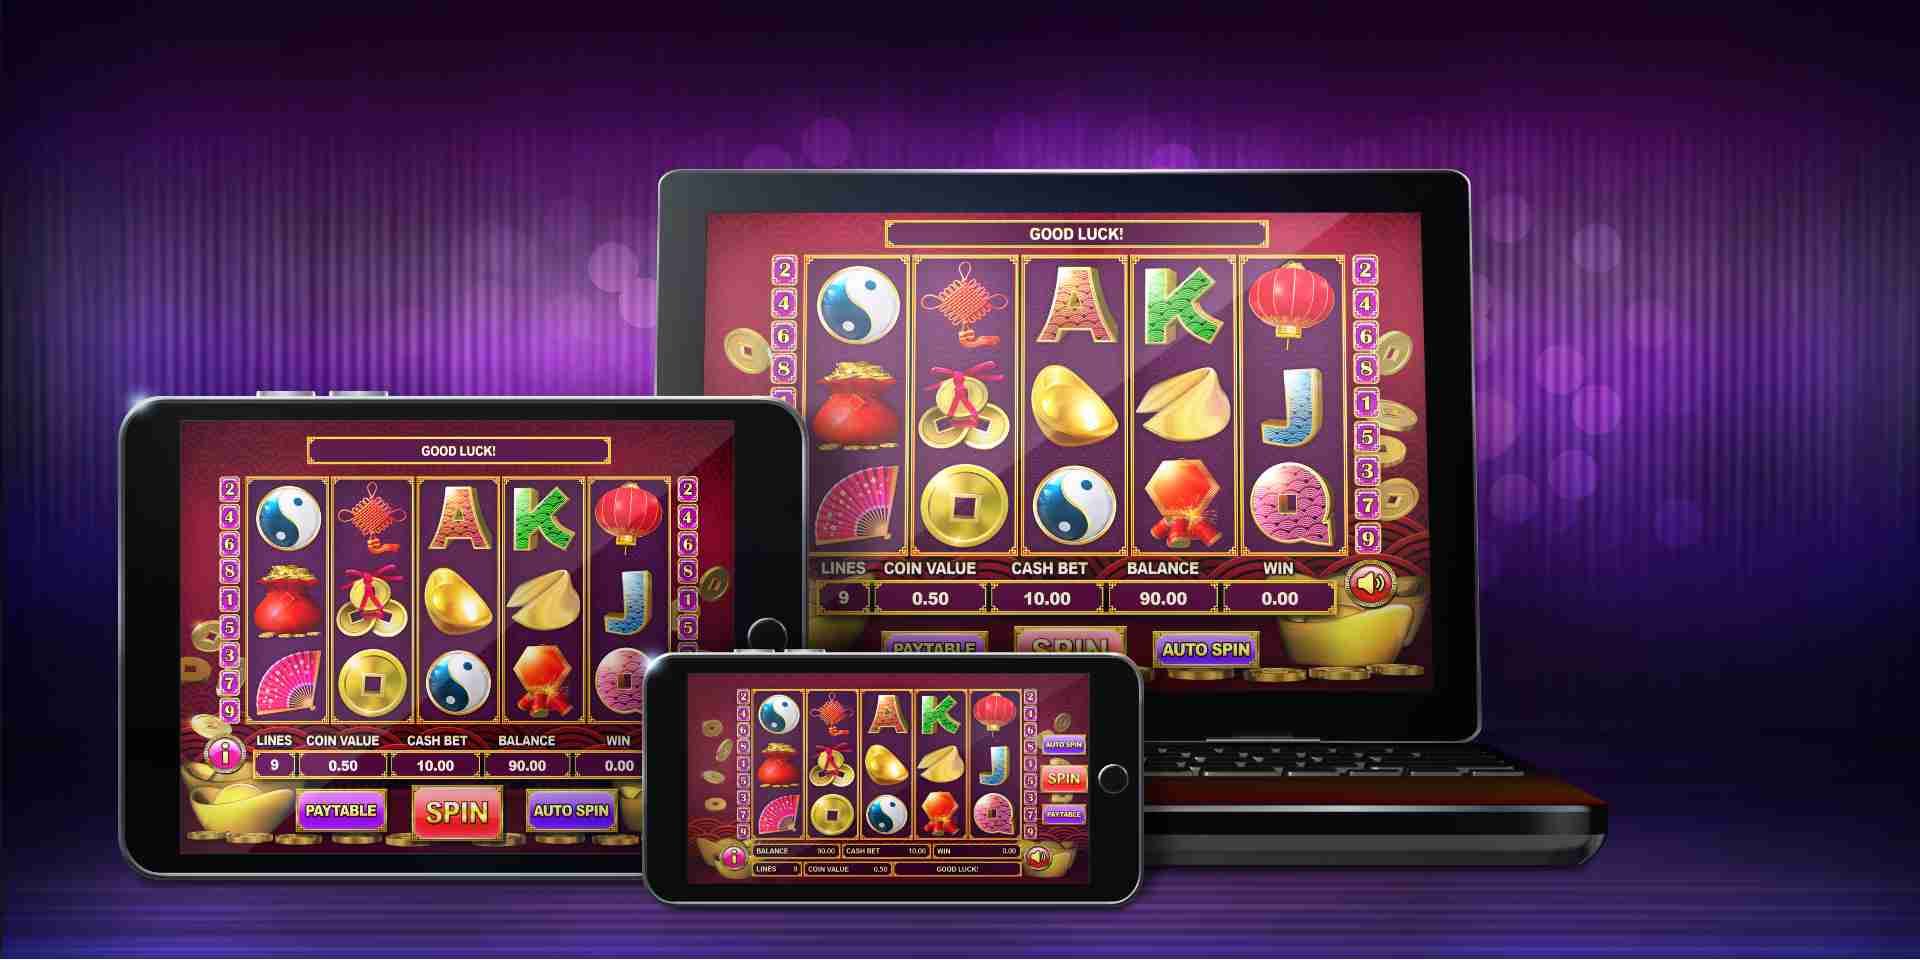 Play in Online Casino Montreal